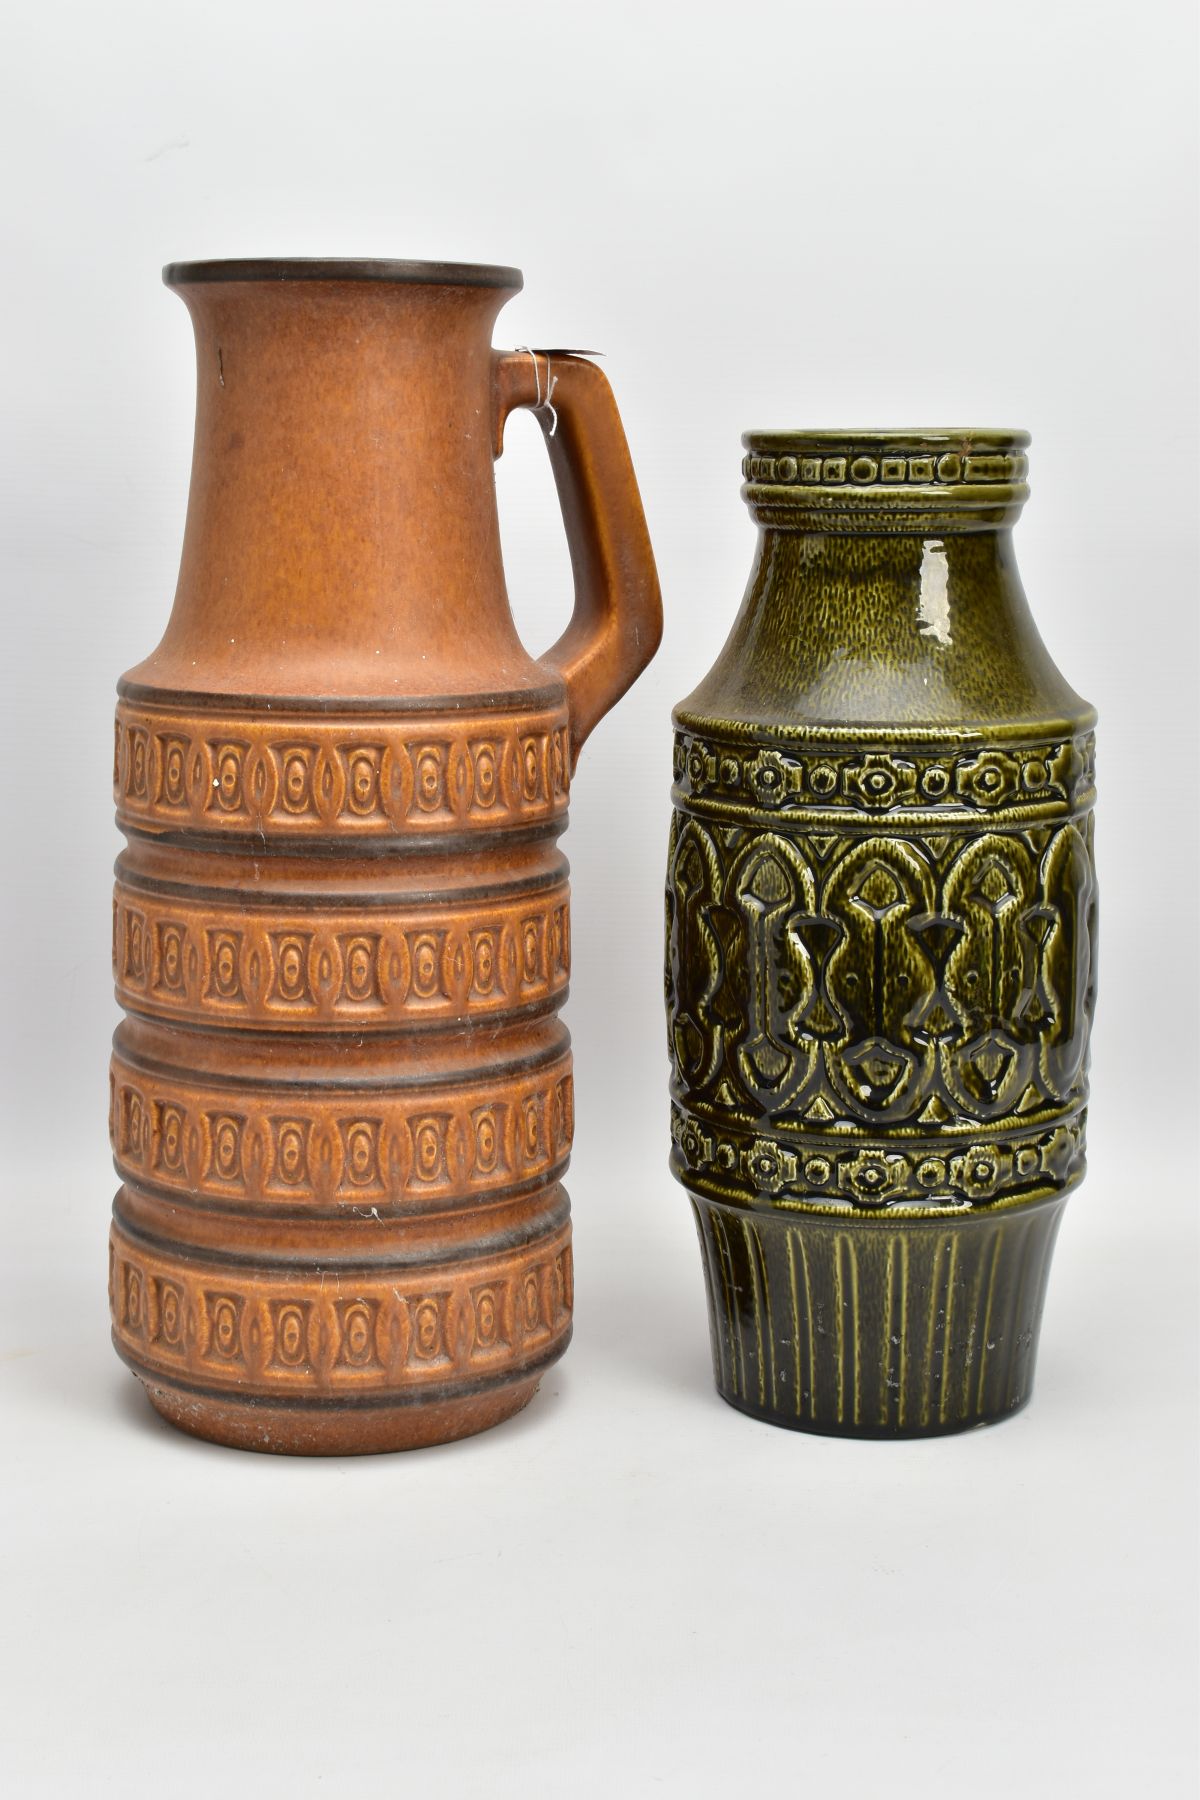 A WEST GERMAN POTTERY JUG WITH AN ART POTTERY VASE, the West German jug measuring 45cm high, being